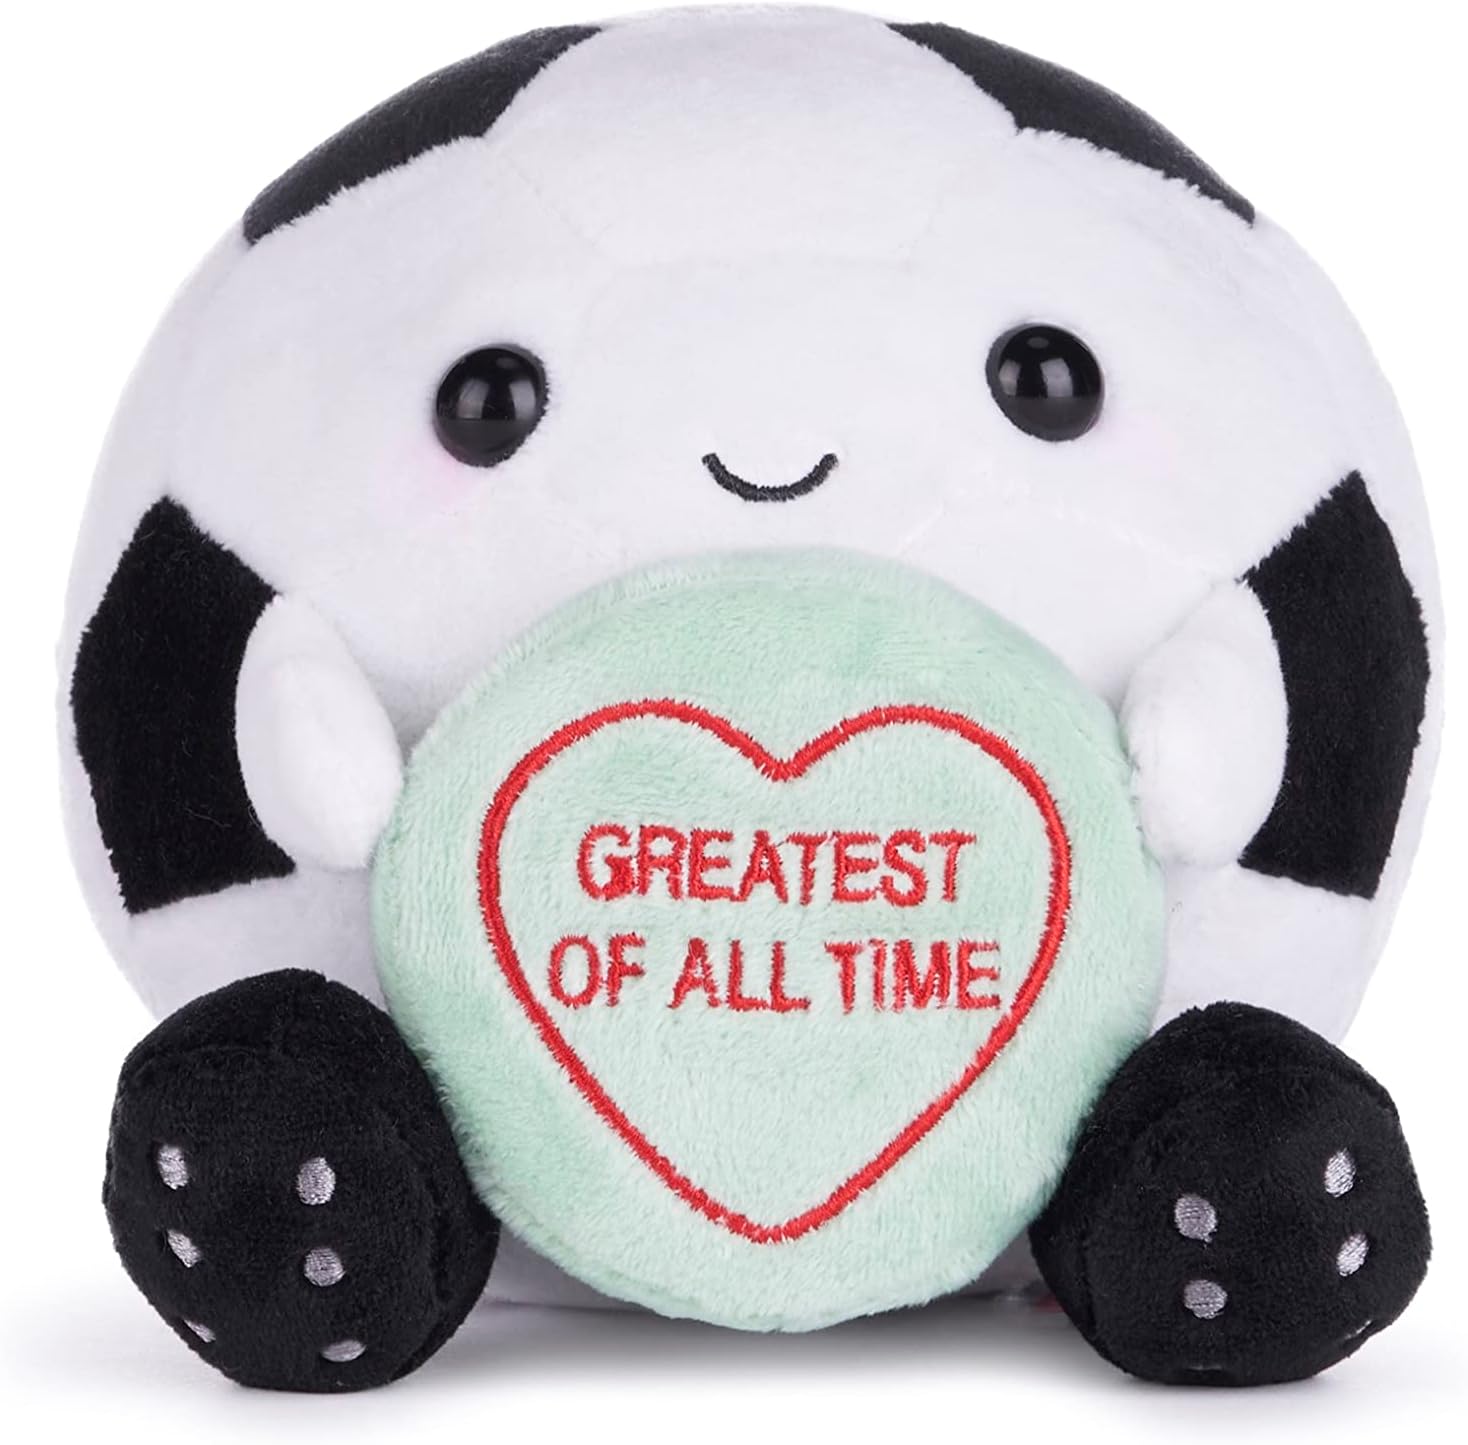 Posh Paws Swizzels Love Hearts 13cm Frankie The Football Greatest of All Time Soft Plush